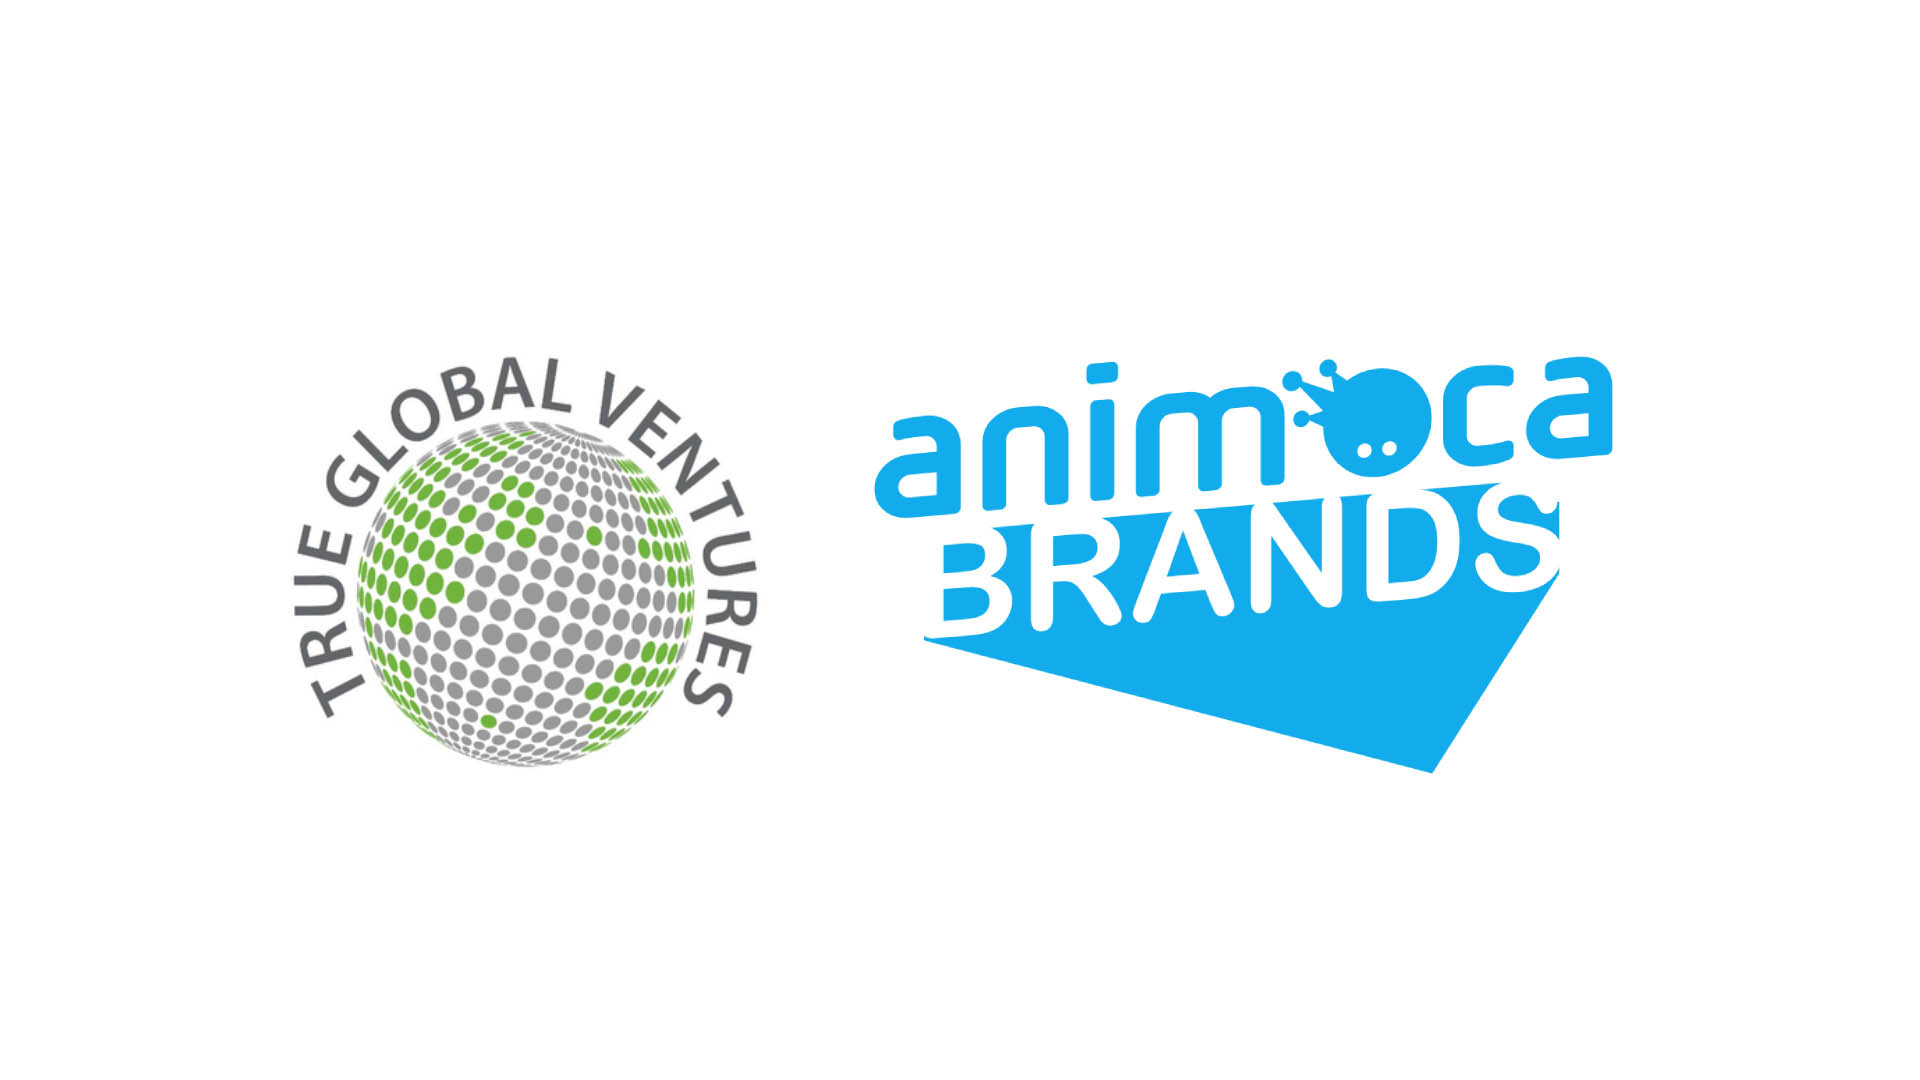 True Global Ventures 4 Plus Follow On Fund’s first investment is in web3 leader Animoca Brands